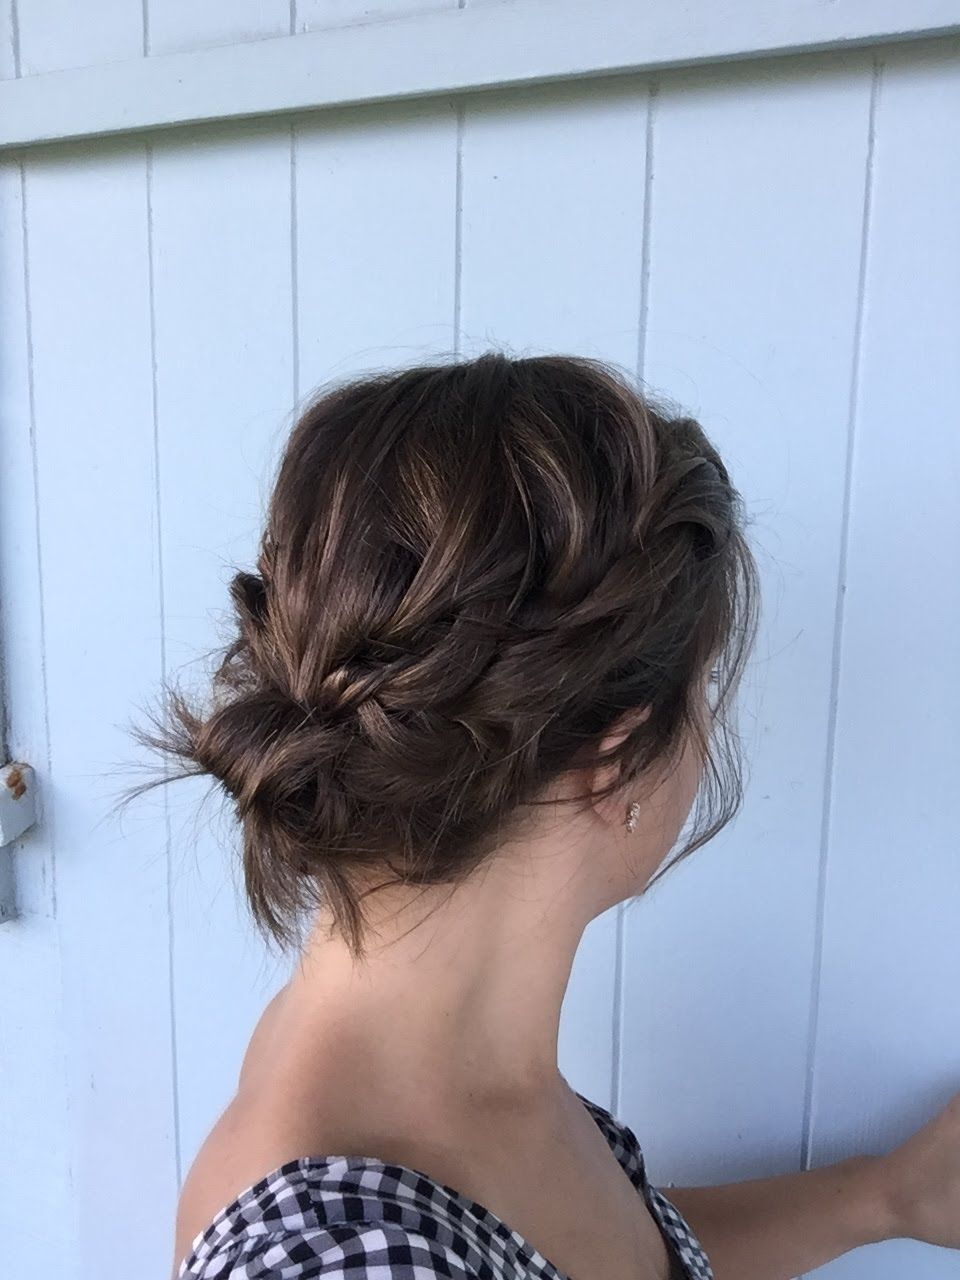 Easy Braided Updo On Chin Length Hair (View 11 of 15)